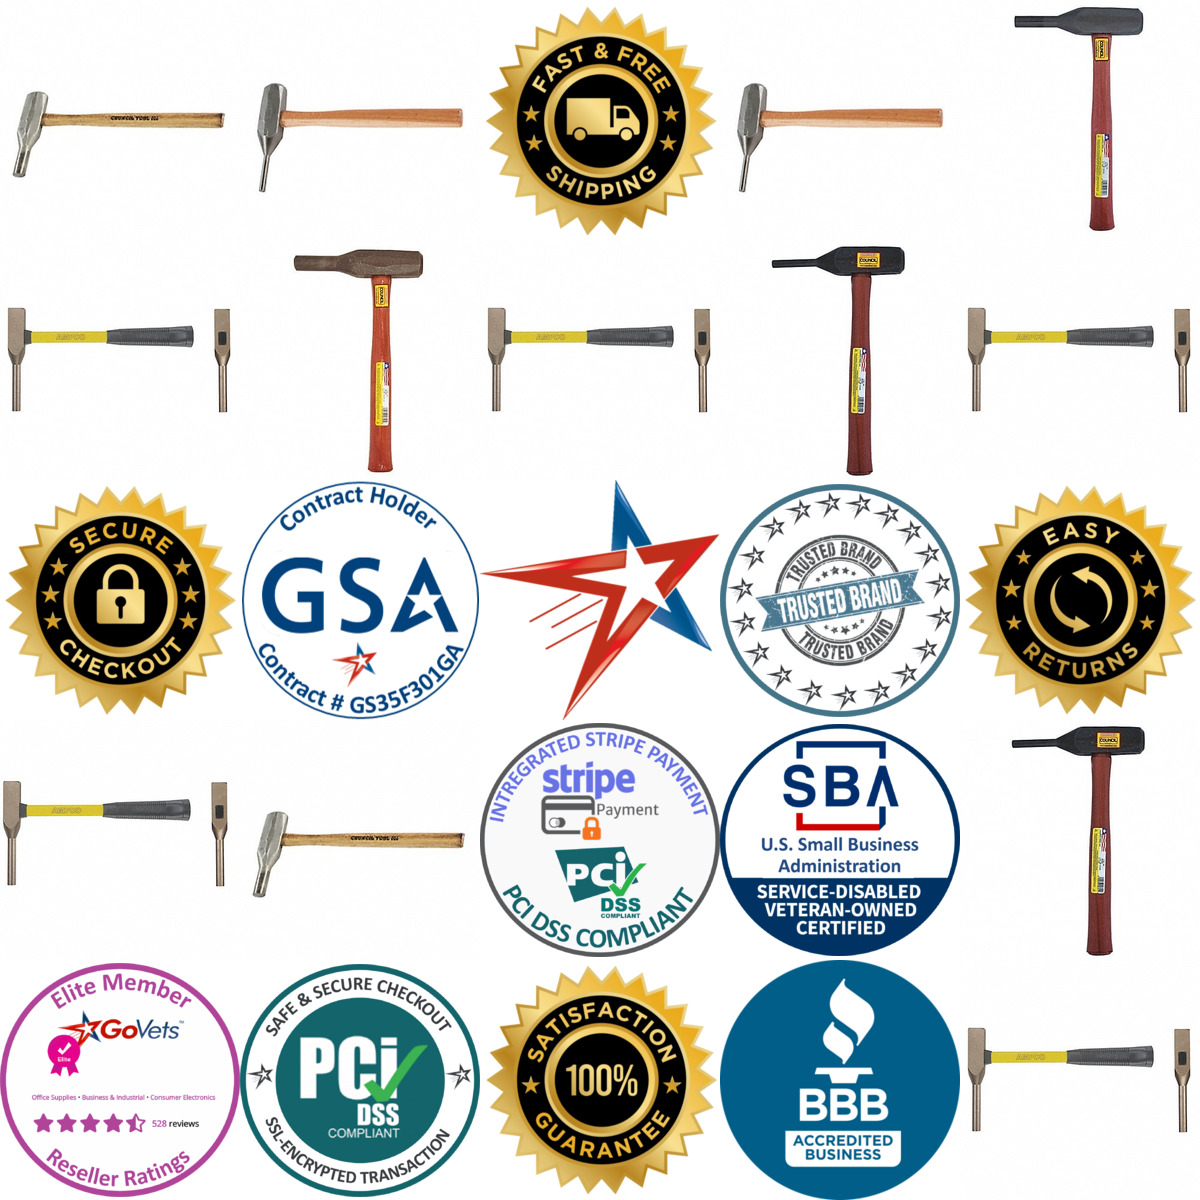 A selection of Punch Hammers products on GoVets